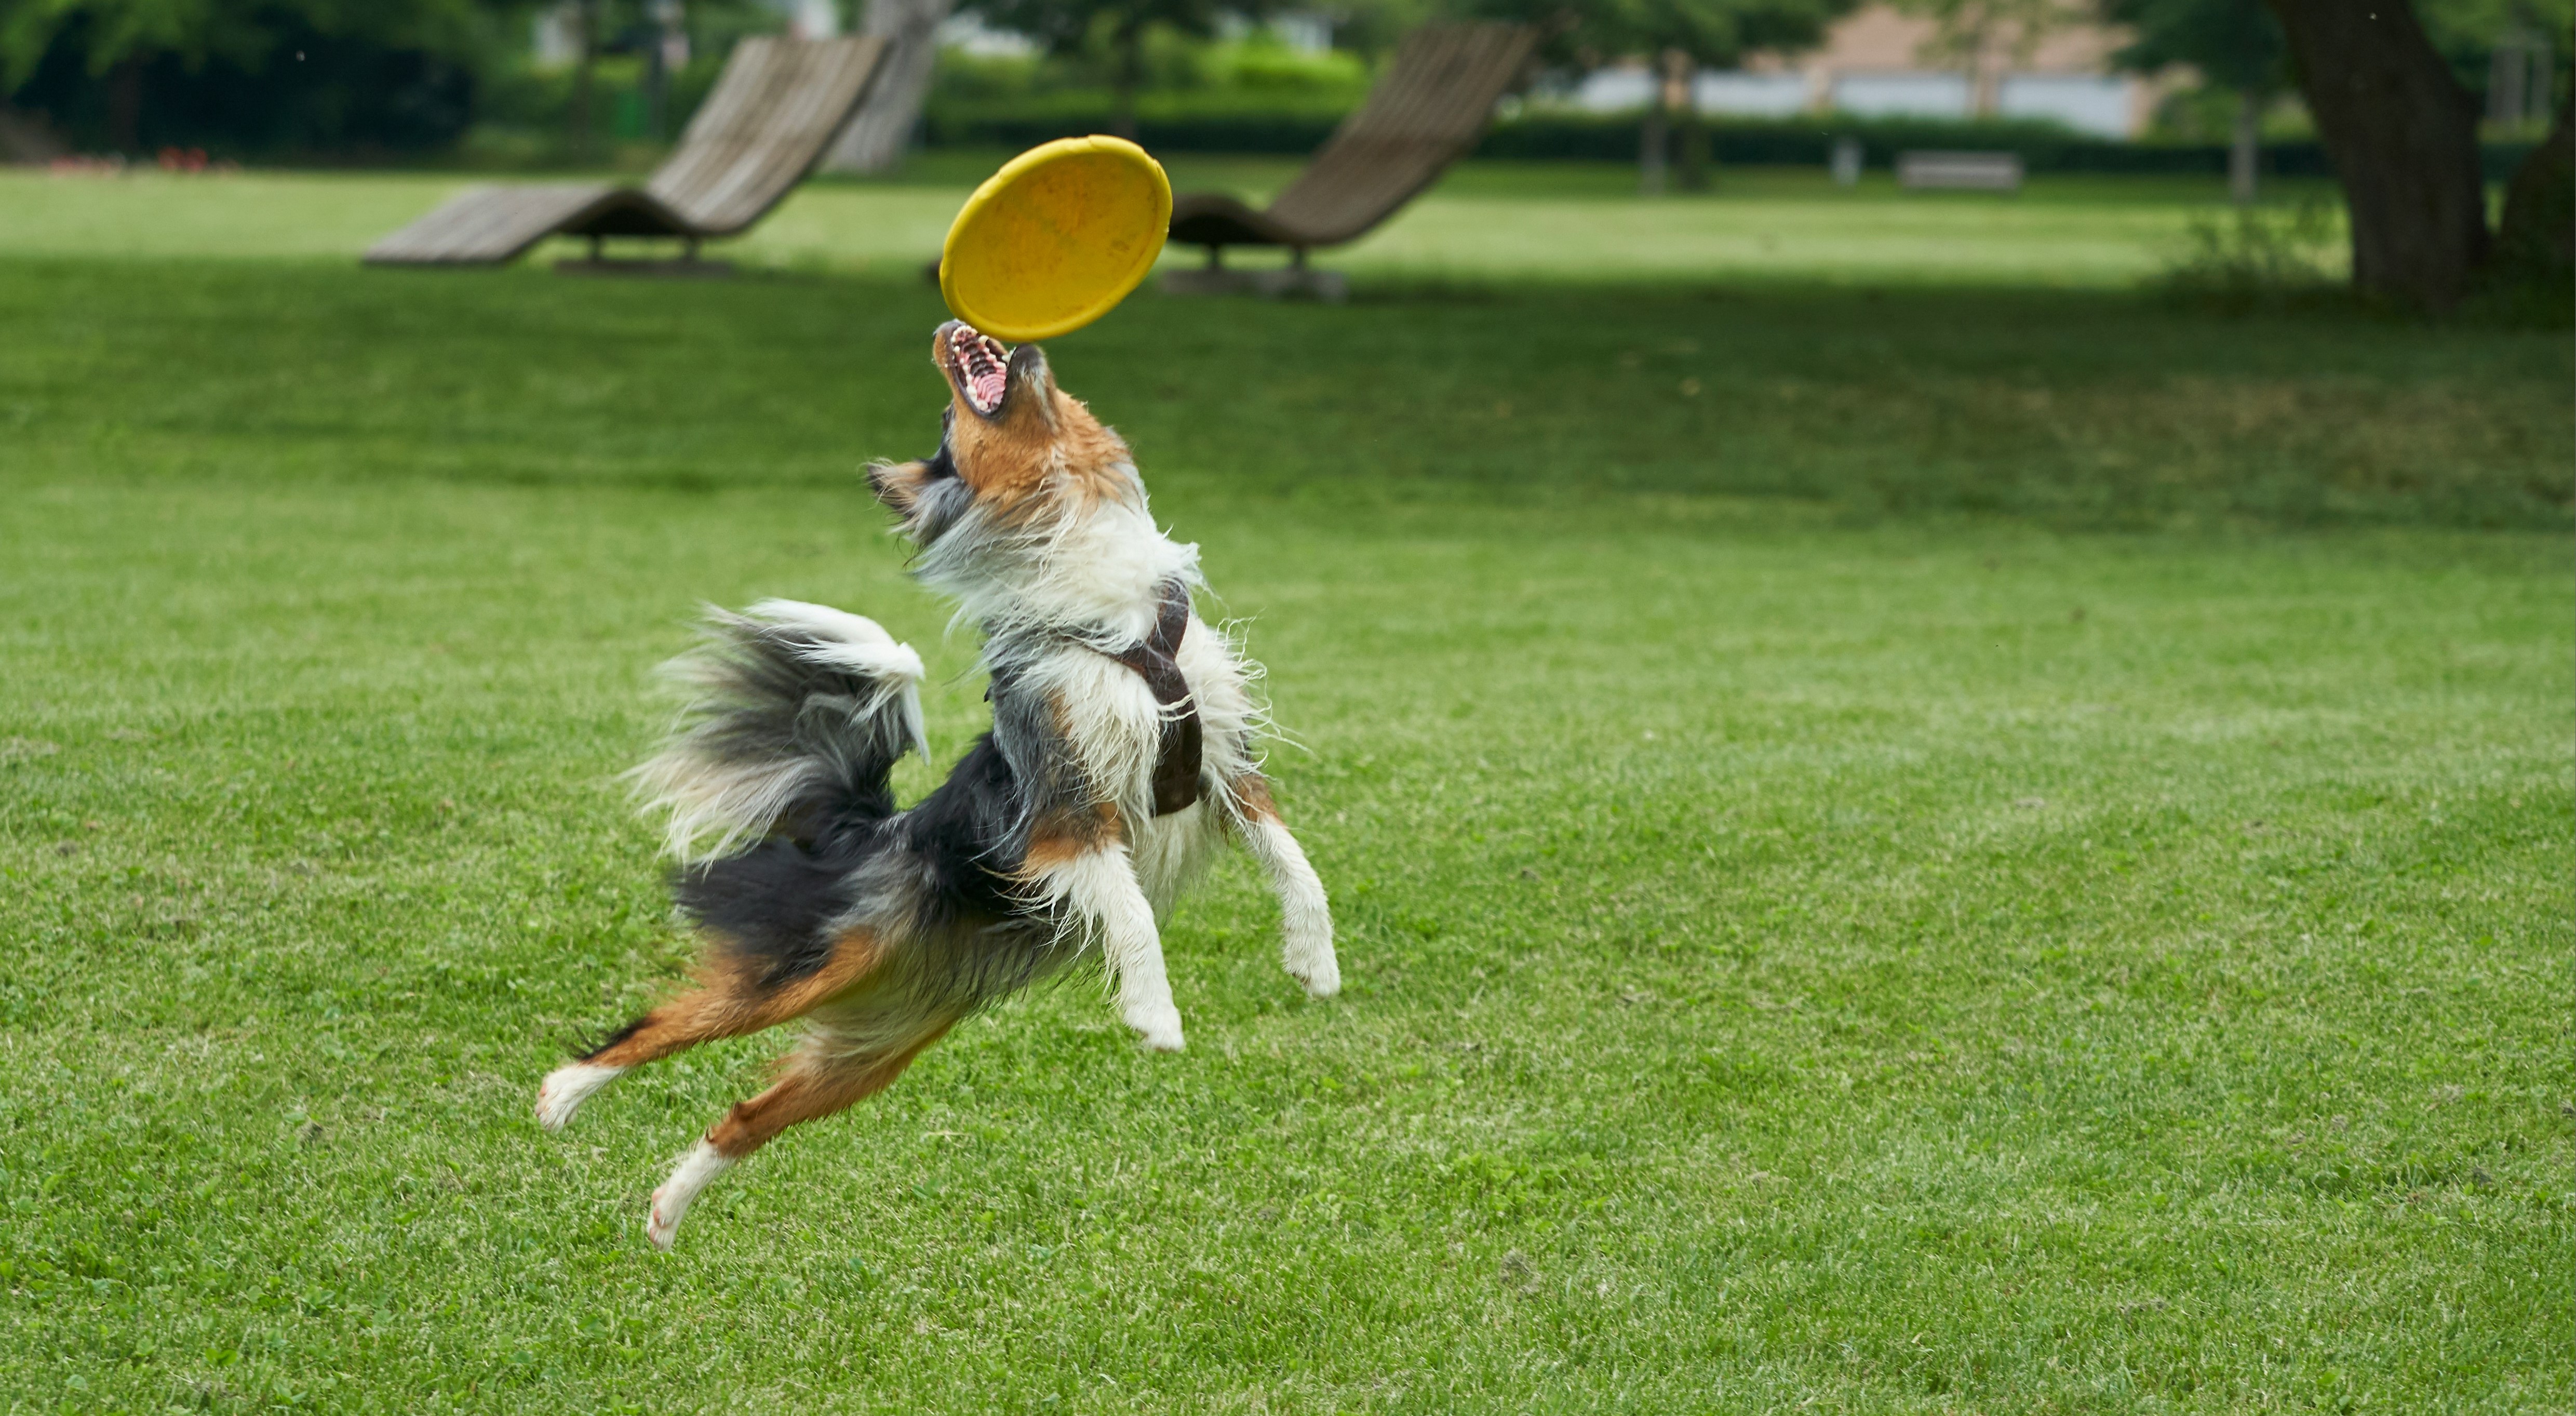 aussie dog jumping to catch a frisbee